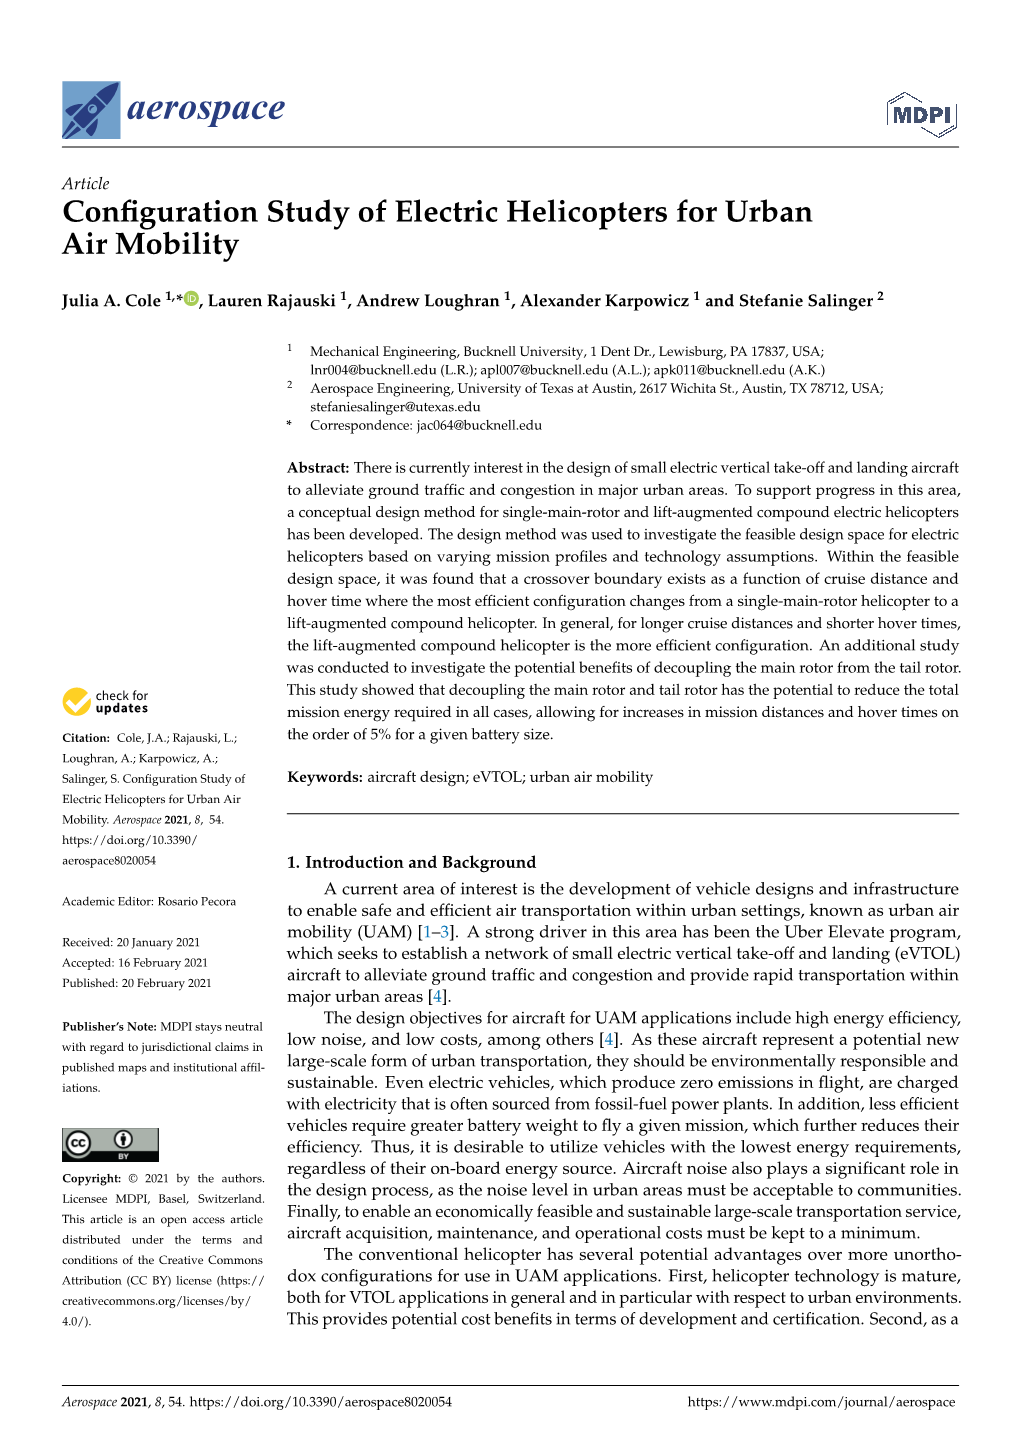 Configuration Study of Electric Helicopters for Urban Air Mobility